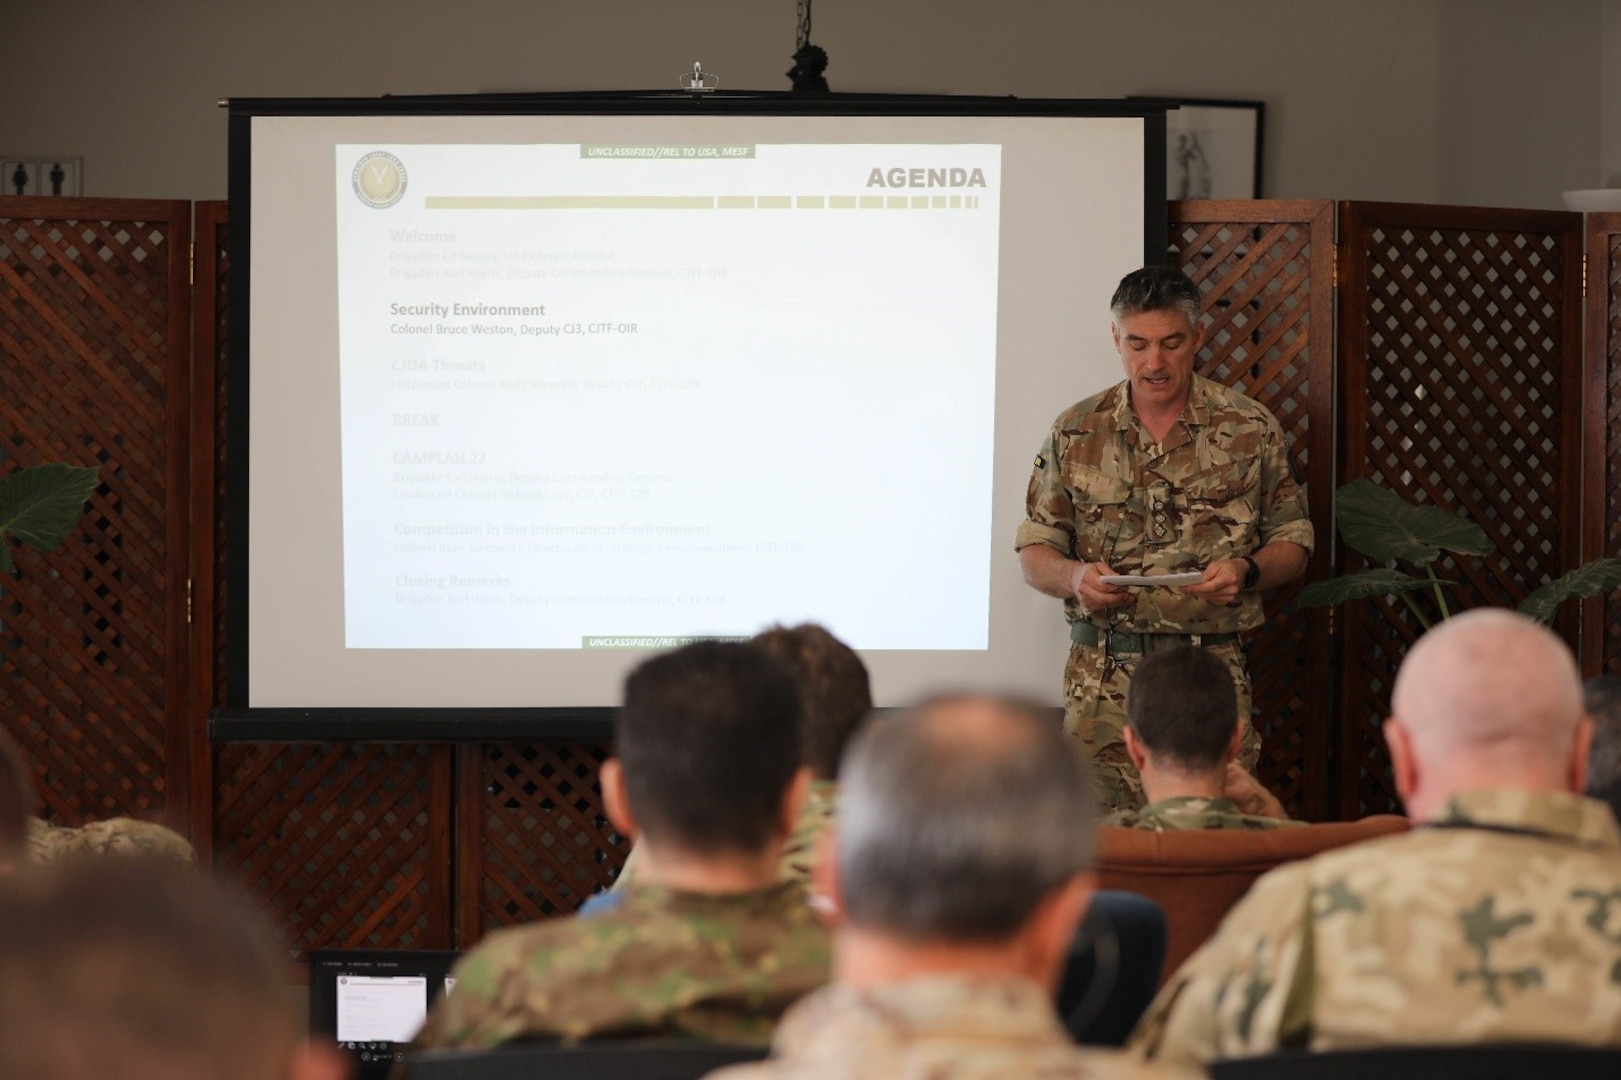 Col. Bruce Weston, deputy CJ3, Combined Joint Task Force – Operation Inherent Resolve (CJTF-OIR), gives a brief on the security environment during the defense attaché forum in Baghdad, Iraq, March 17, 2022. The defense attaché forum serves as an opportunity to build-relationships among Global Coalition members, and as a gateway to discuss topics pertaining to the enduring defeat of Da’esh including CJTF – OIR’s progress and areas of needed improvement. (U.S. Army photo by Staff Sgt. Bree-Ann Ramos-Clifton)